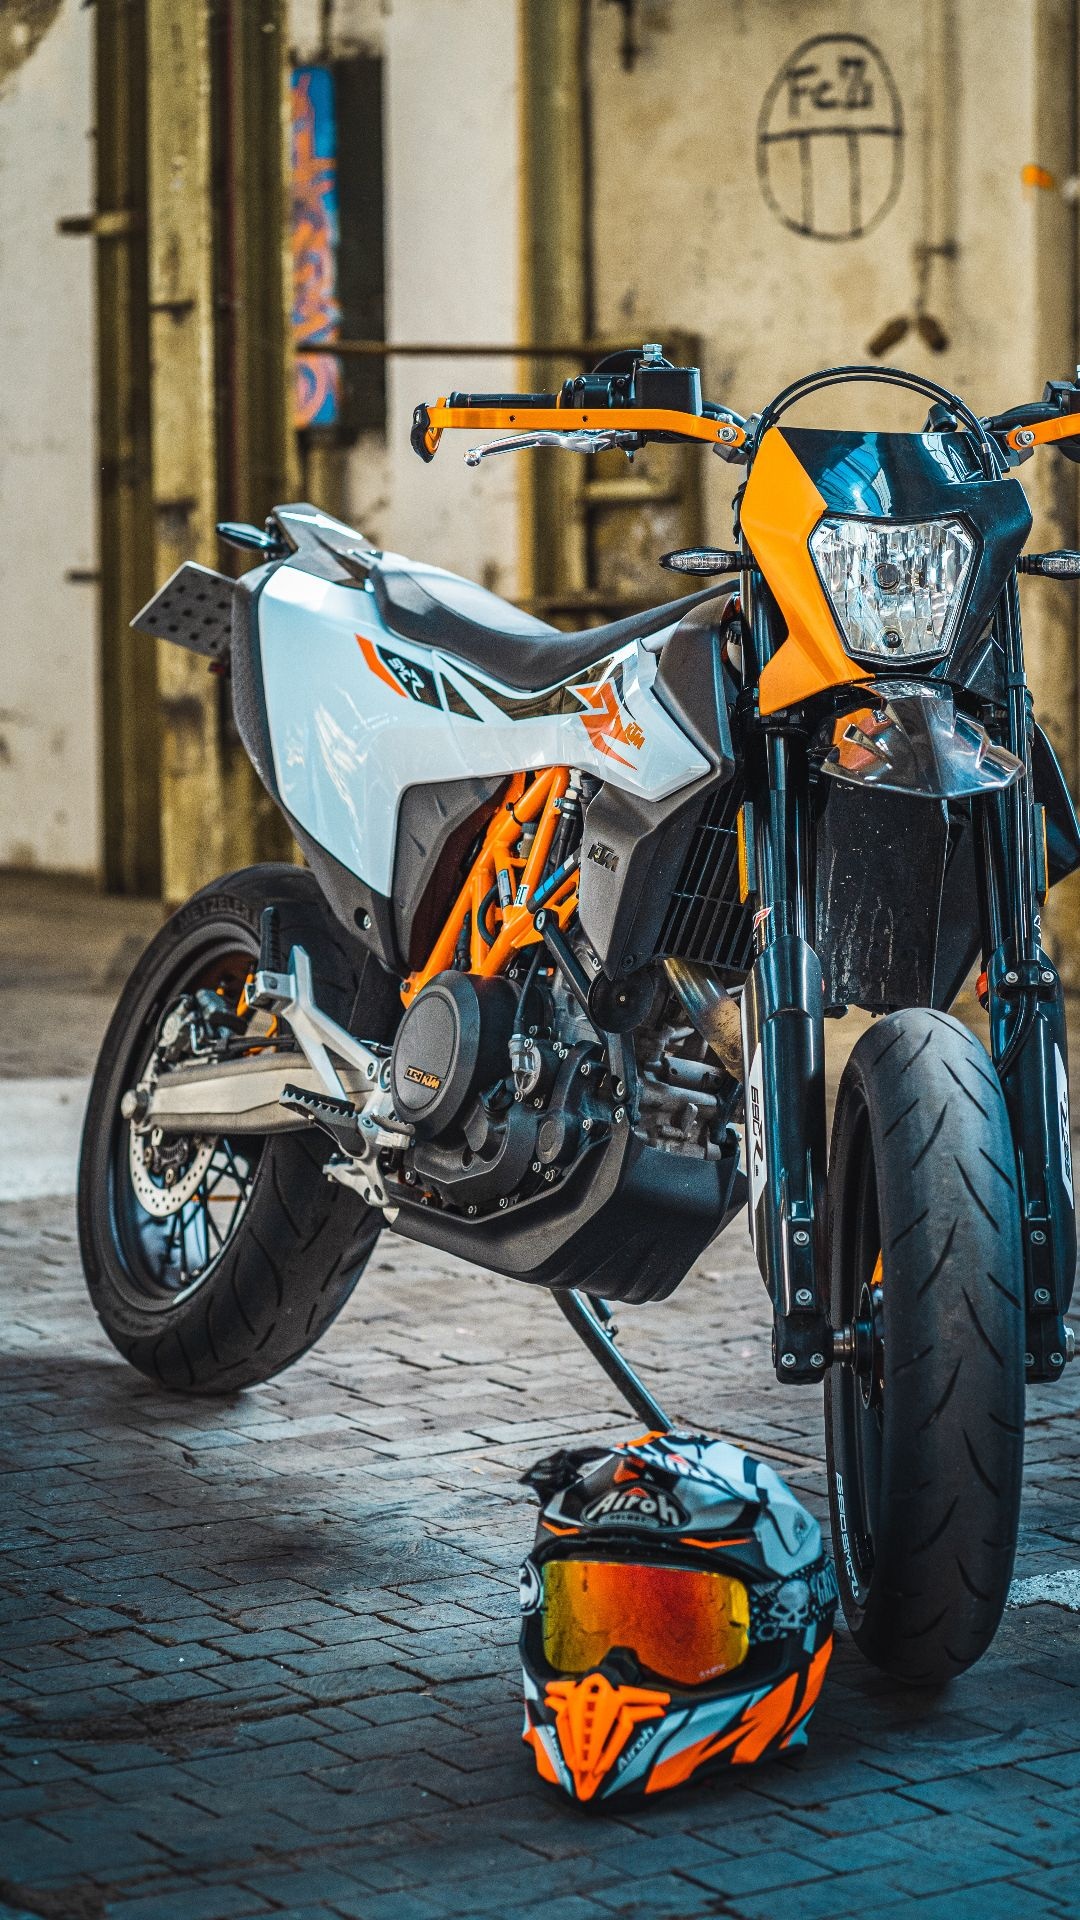 KTM 690 SMC, High-quality wallpapers, Backgrounds gallery, Motorcycle enthusiasts, 1080x1920 Full HD Phone